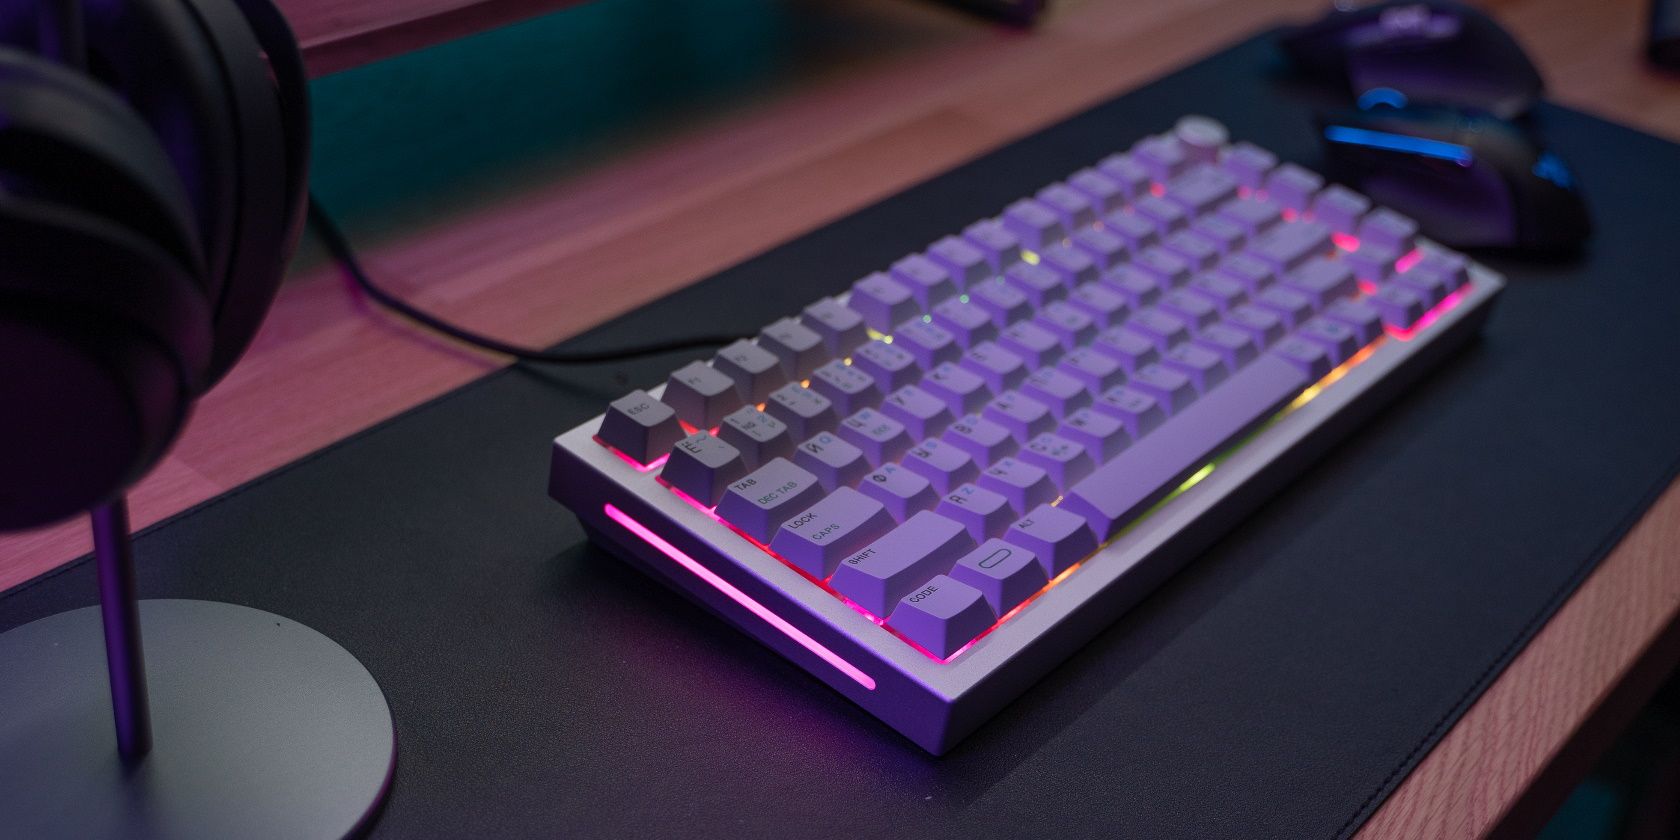  A stylish premium RGB mechanical gaming keyboard with alluminium base, the GMMK PRO by Glorious